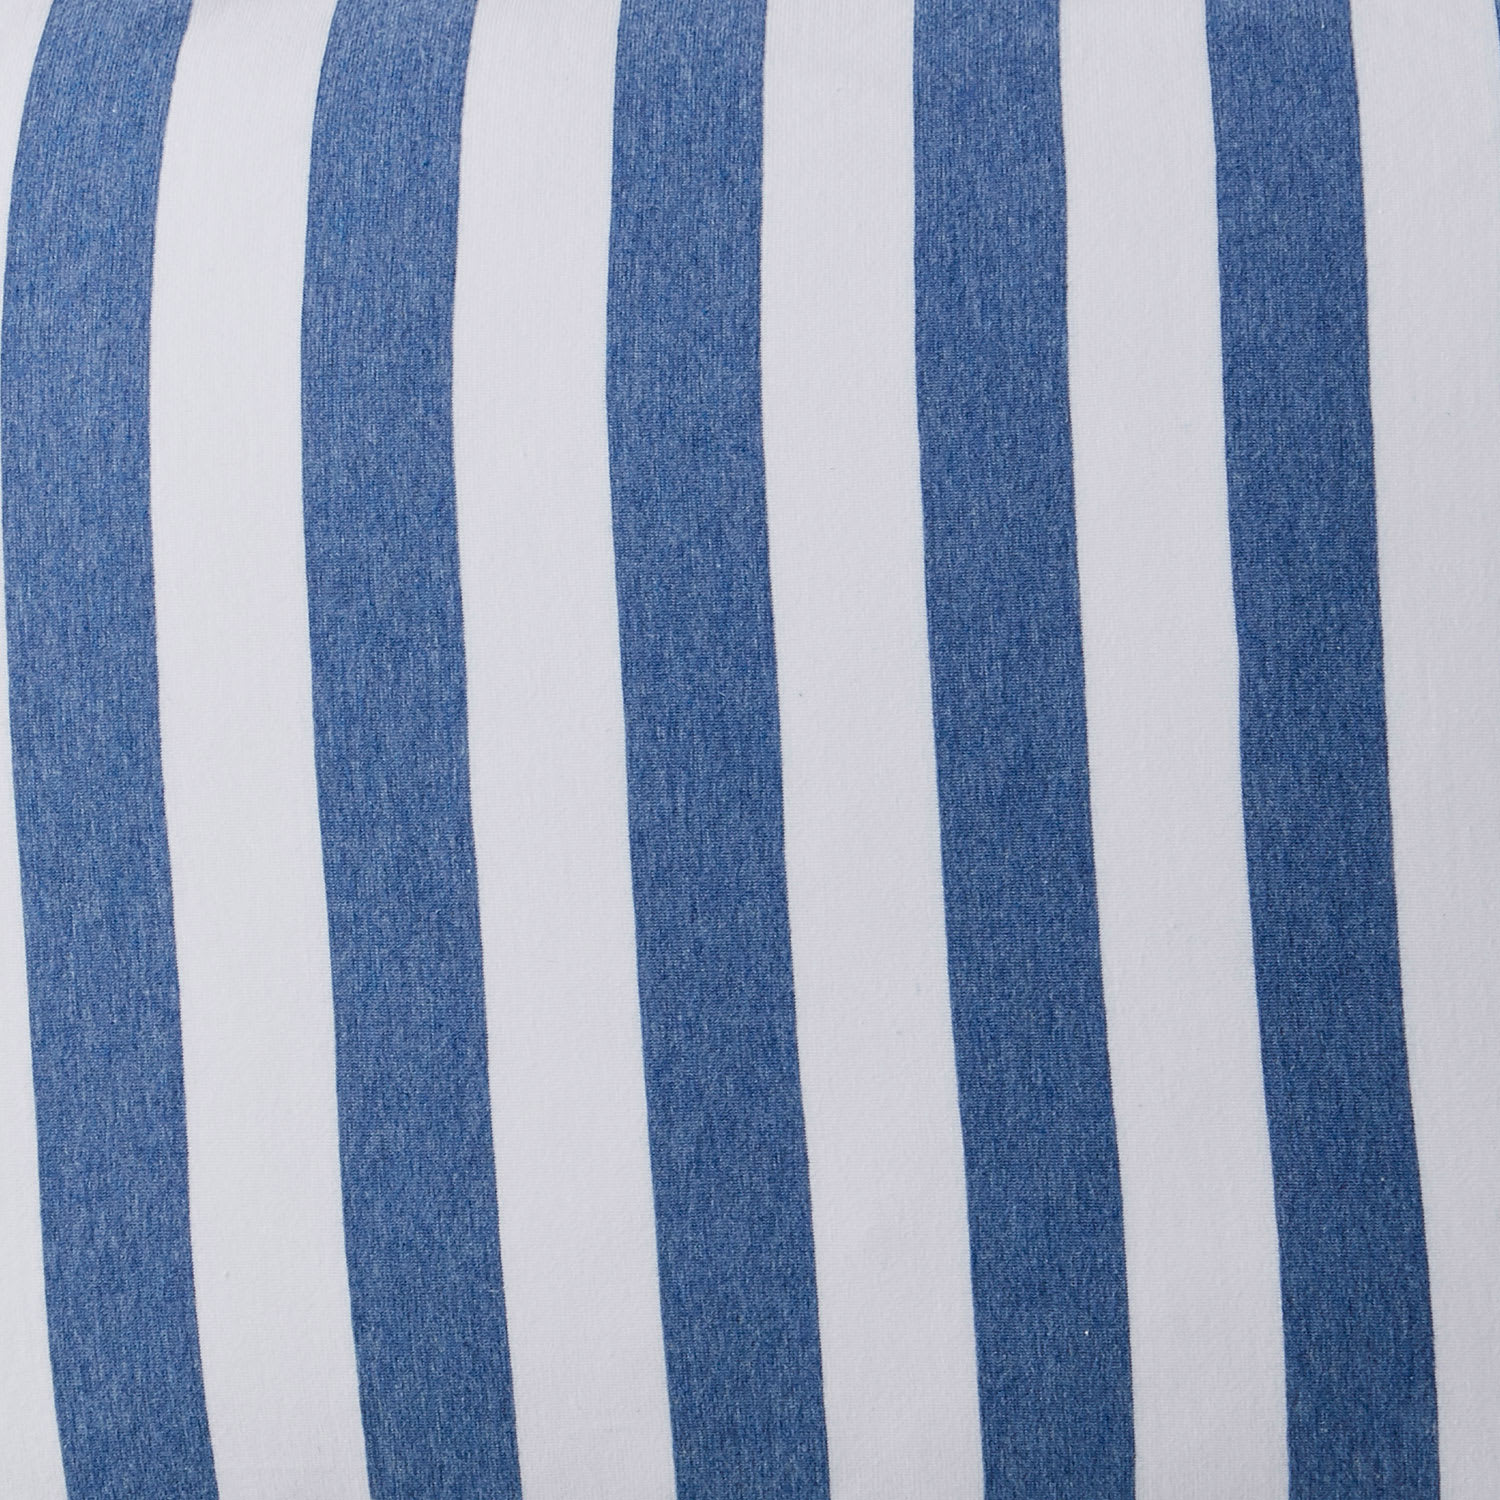 Awning Stripe Space-Dyed Cotton Jersey Duvet Cover - Blue